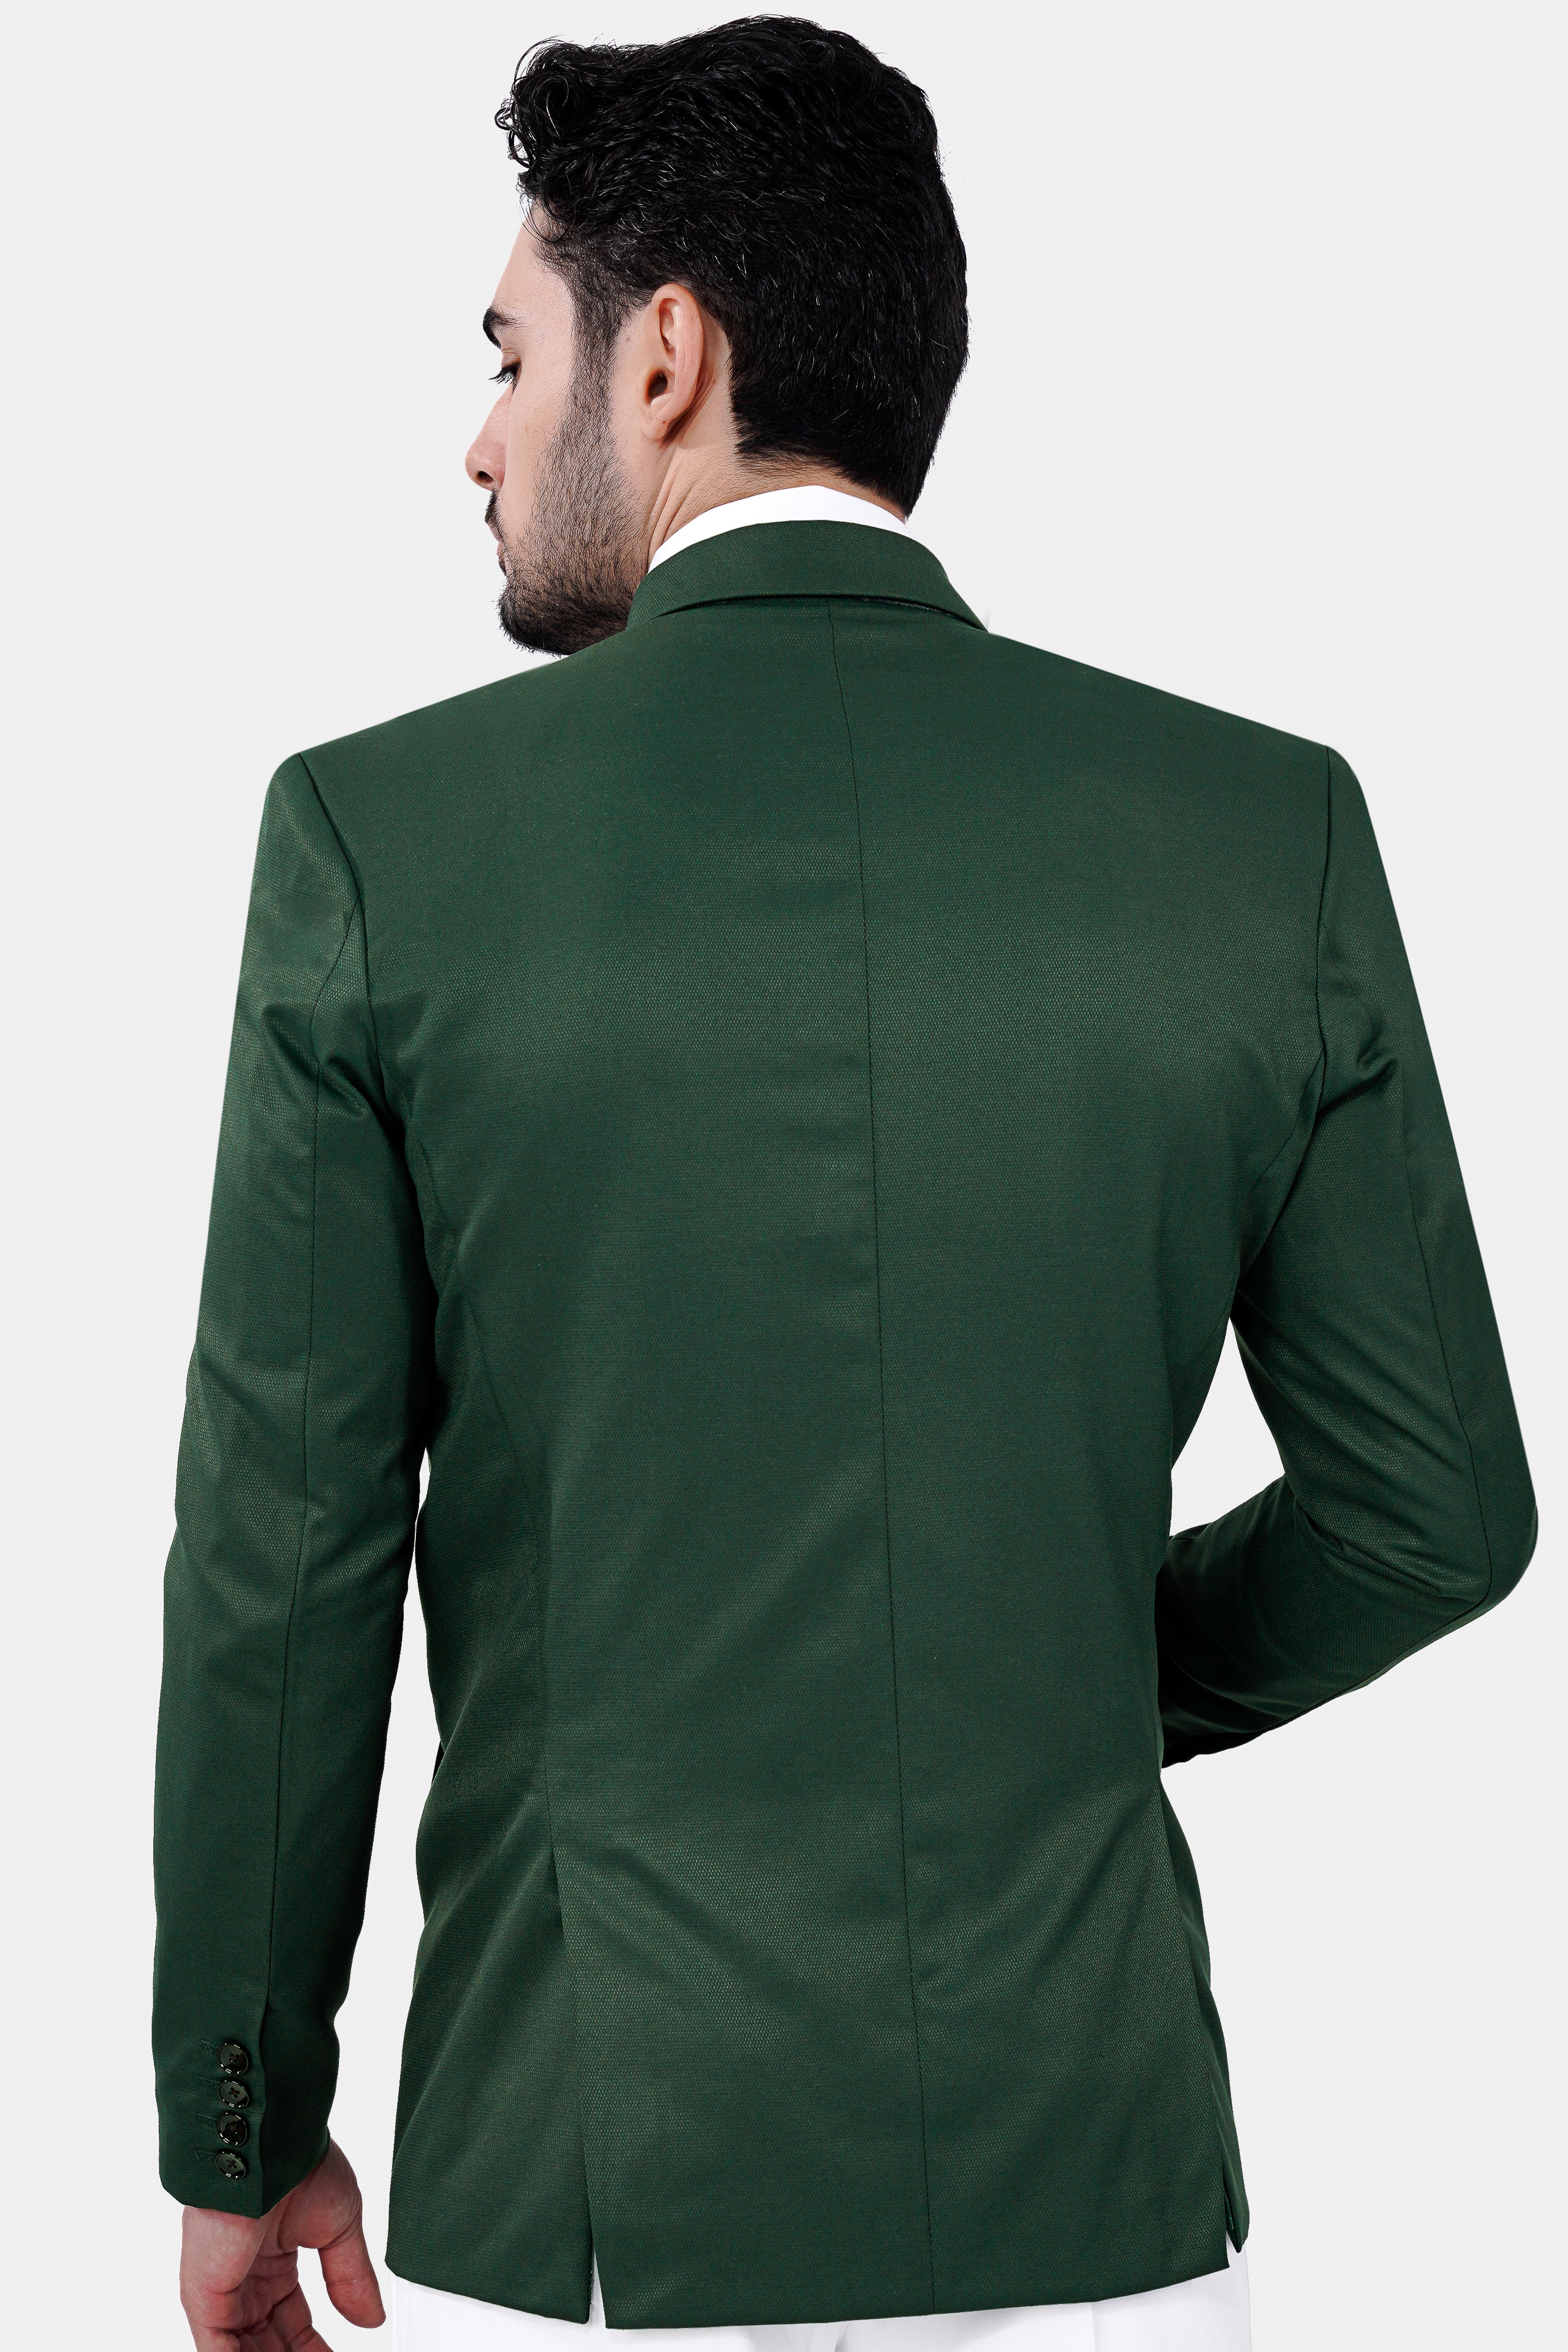 Basil Green Wool Rich Double-Breasted Blazer BL3039-DB2-36, BL3039-DB2-38, BL3039-DB2-40, BL3039-DB2-42, BL3039-DB2-44, BL3039-DB2-46, BL3039-DB2-48, BL3039-DB2-50, BL3039-DB2-52, BL3039-DB2-54, BL3039-DB2-56, BL3039-DB2-58, BL3039-DB2-60